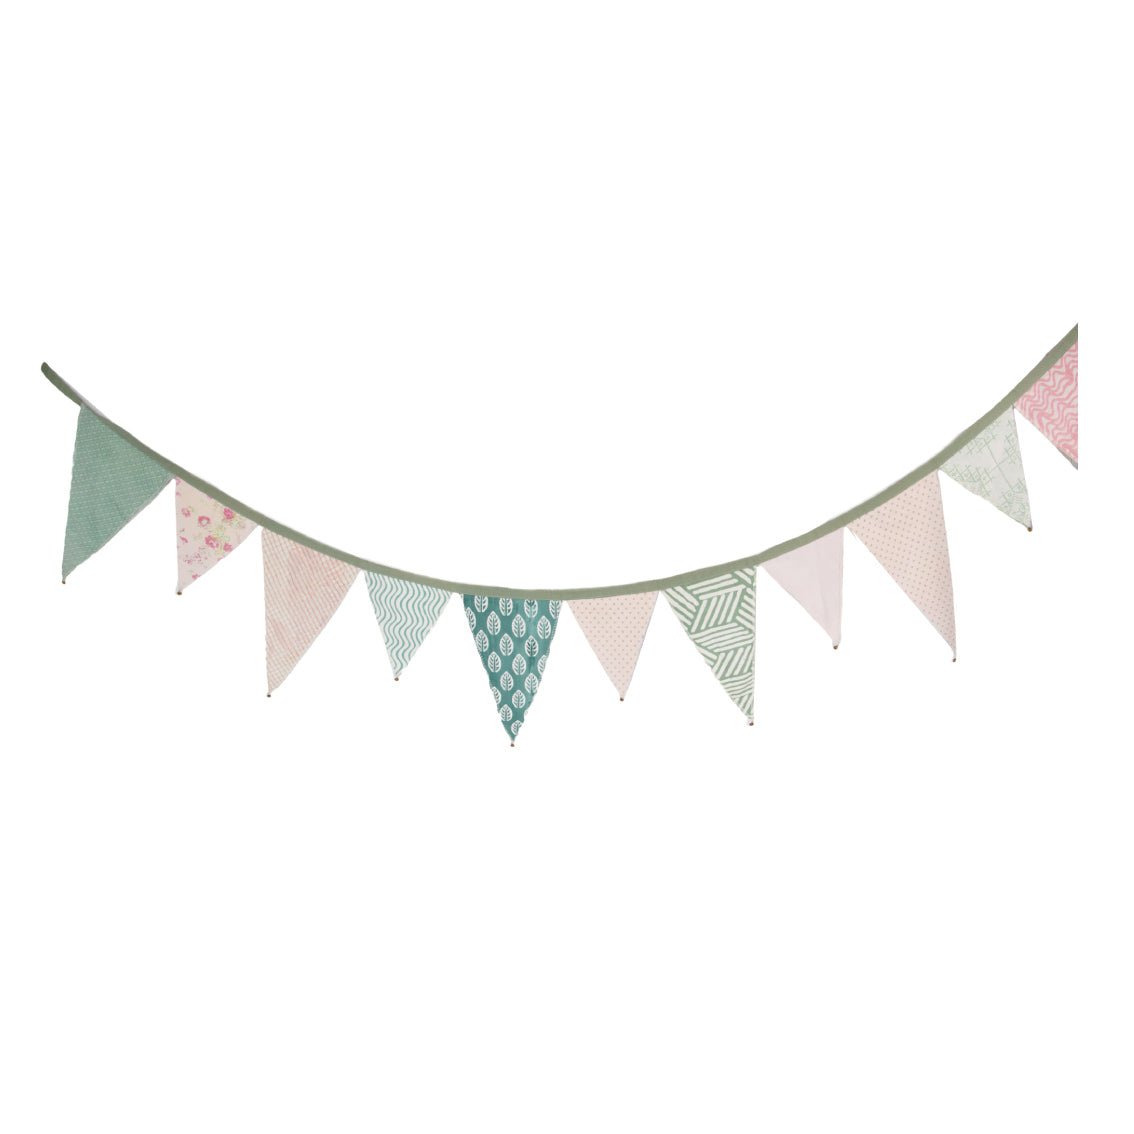 Natural Meadow Sage and Pink Upcycled Cotton Bunting - 3m